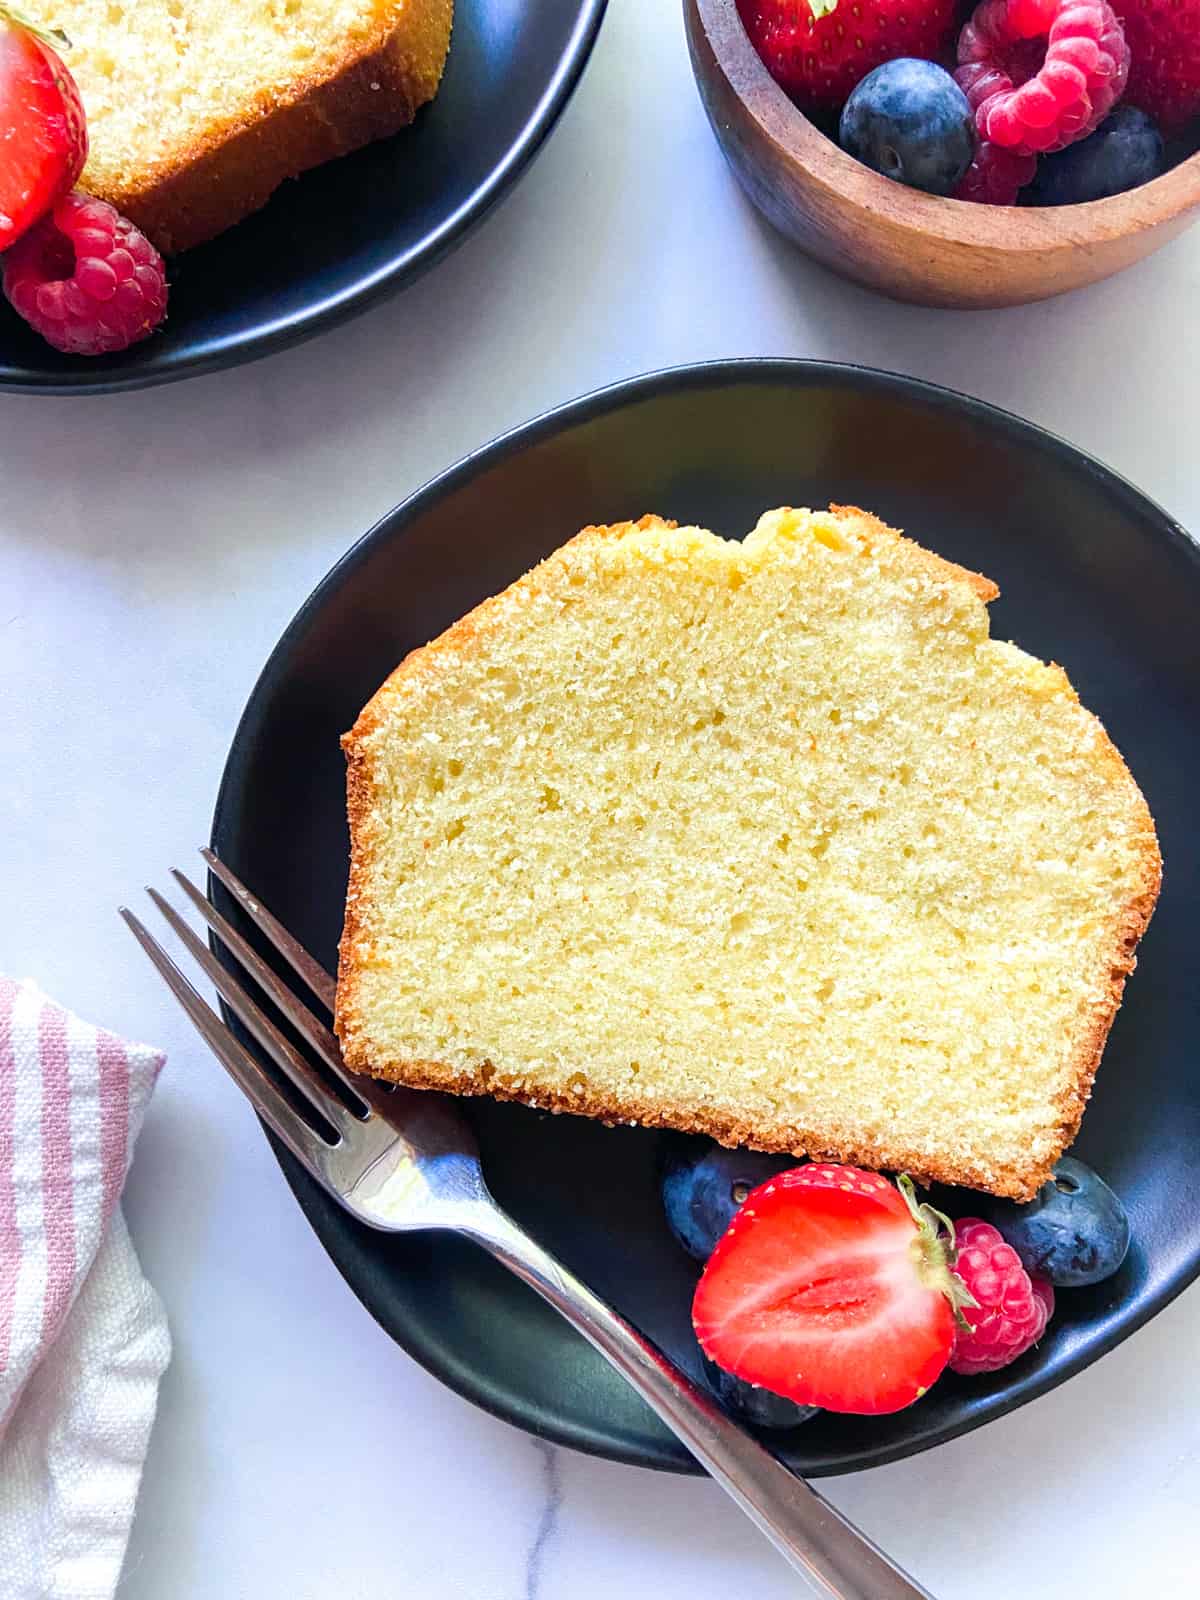 A slice of vanilla buttermilk pound cake on a plate with berries.